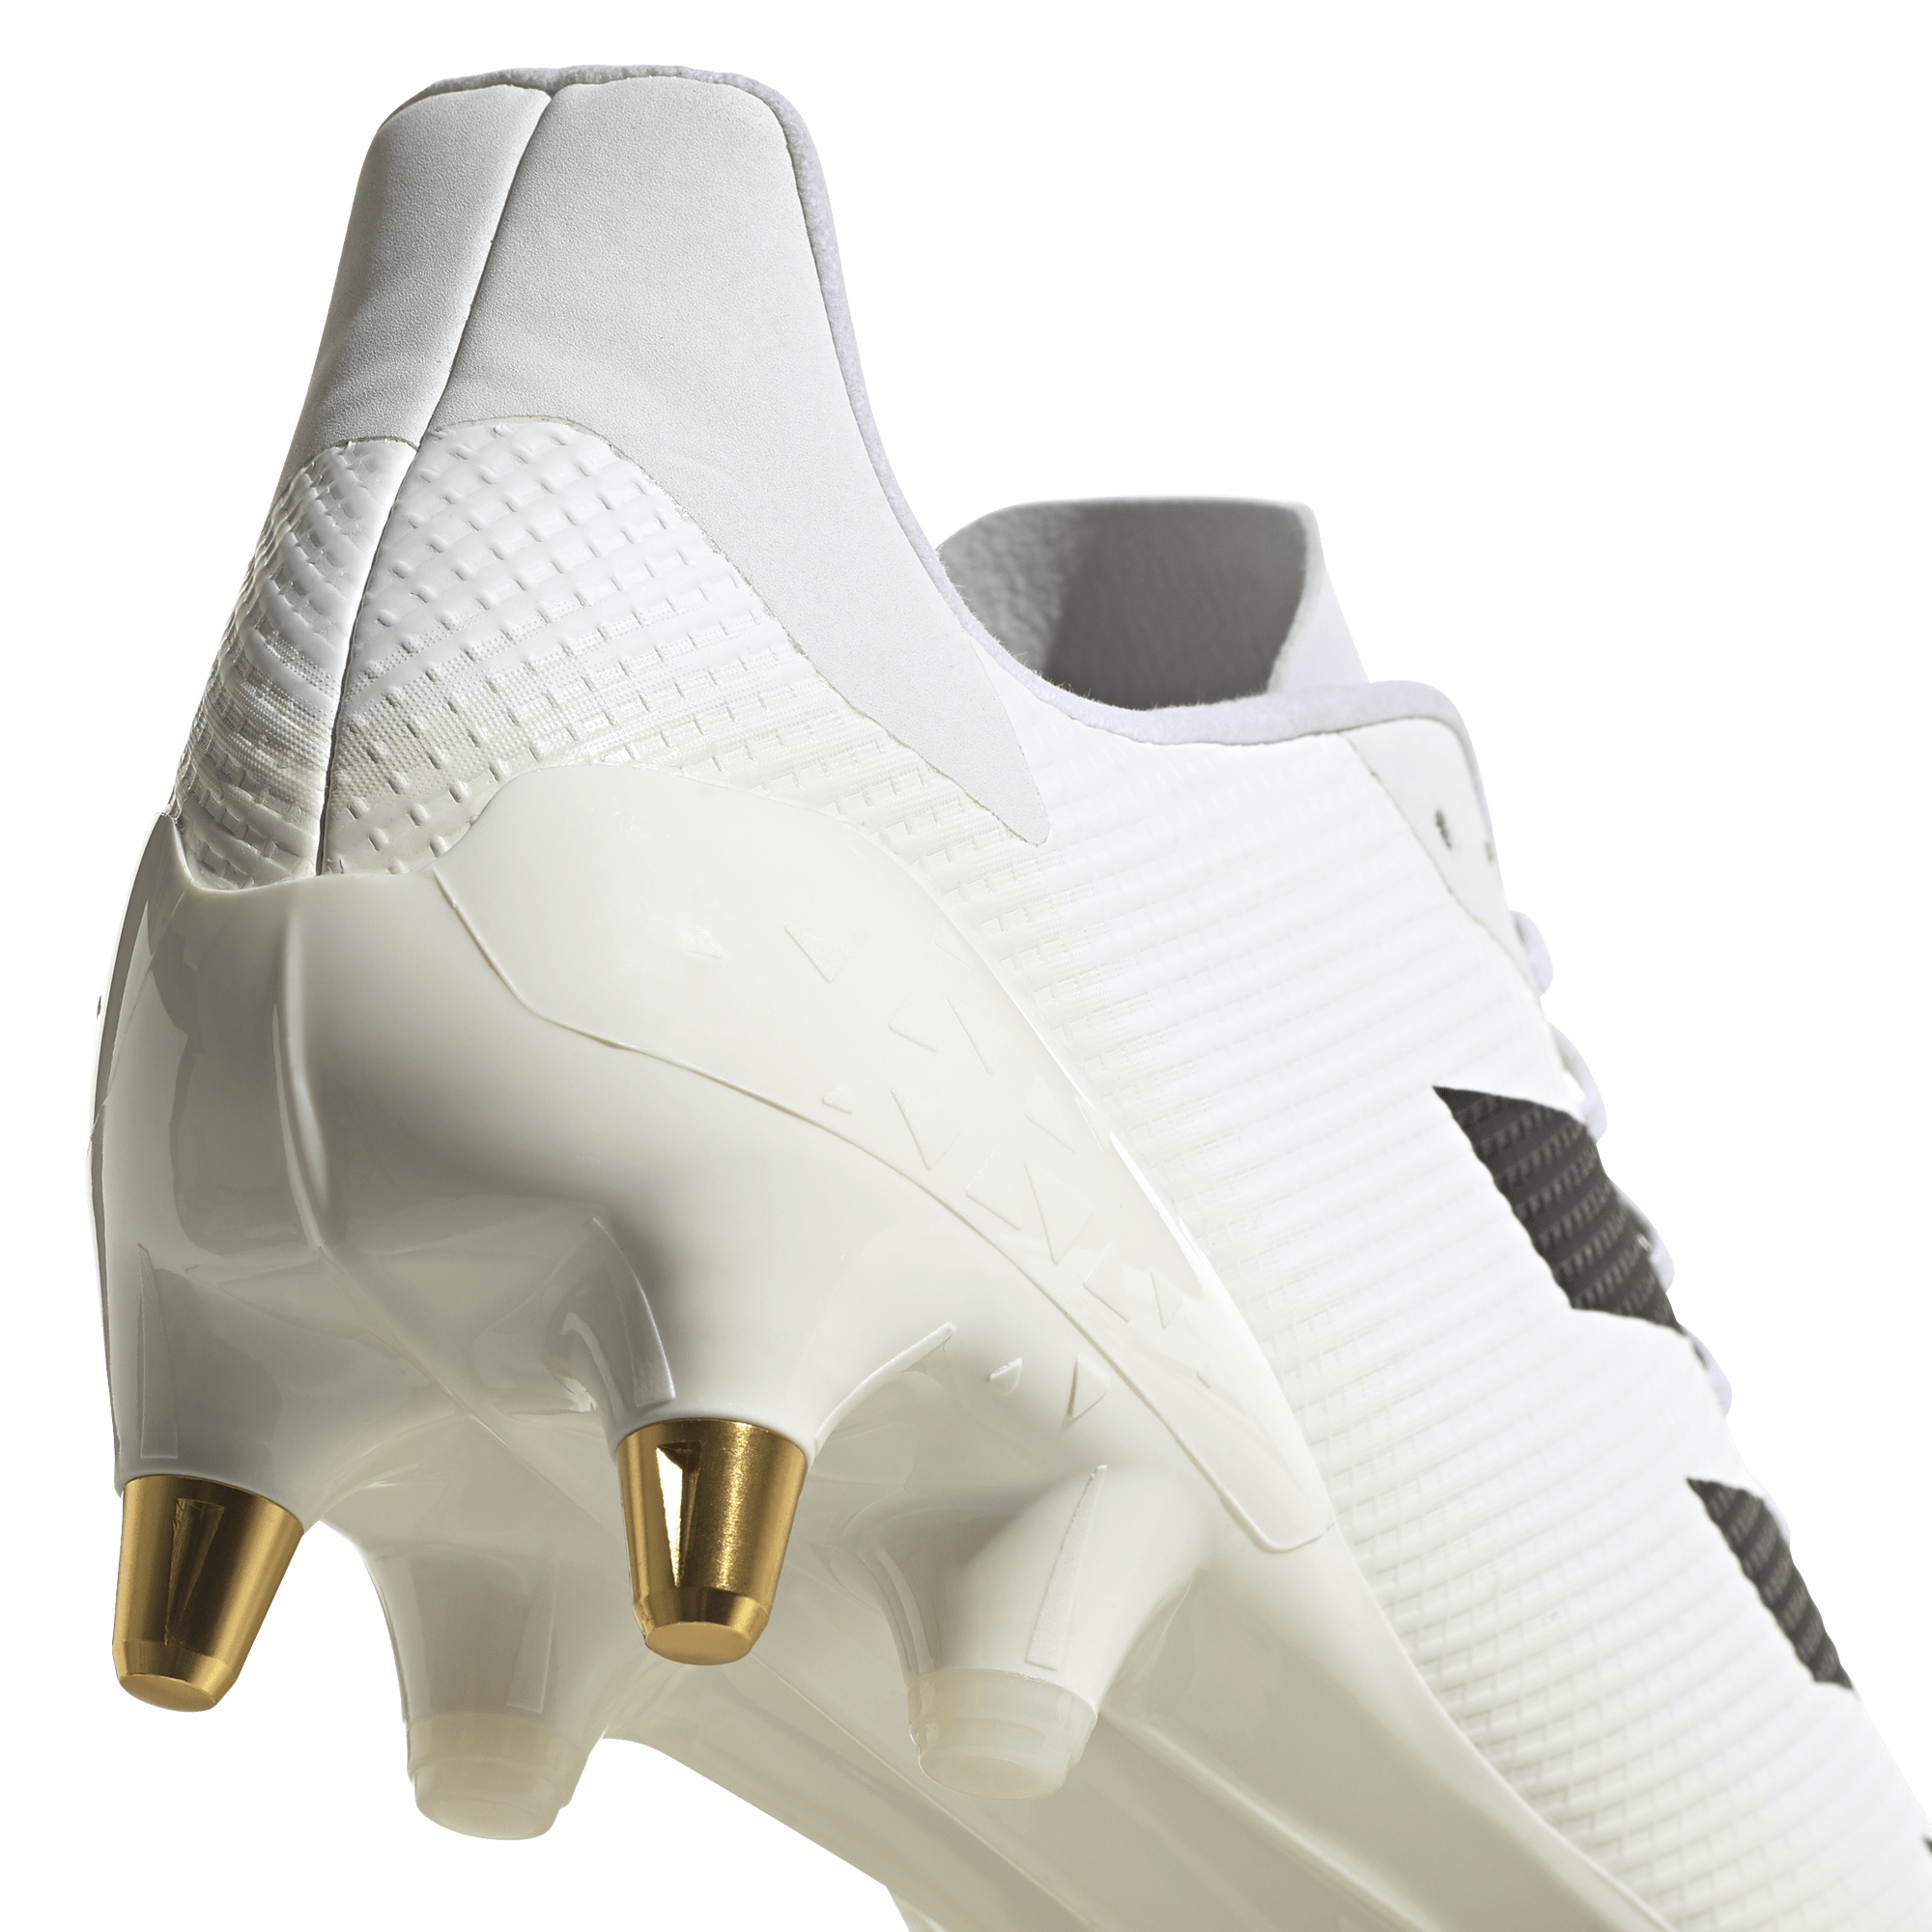 RS7 (SG) Boots - White BOOTS